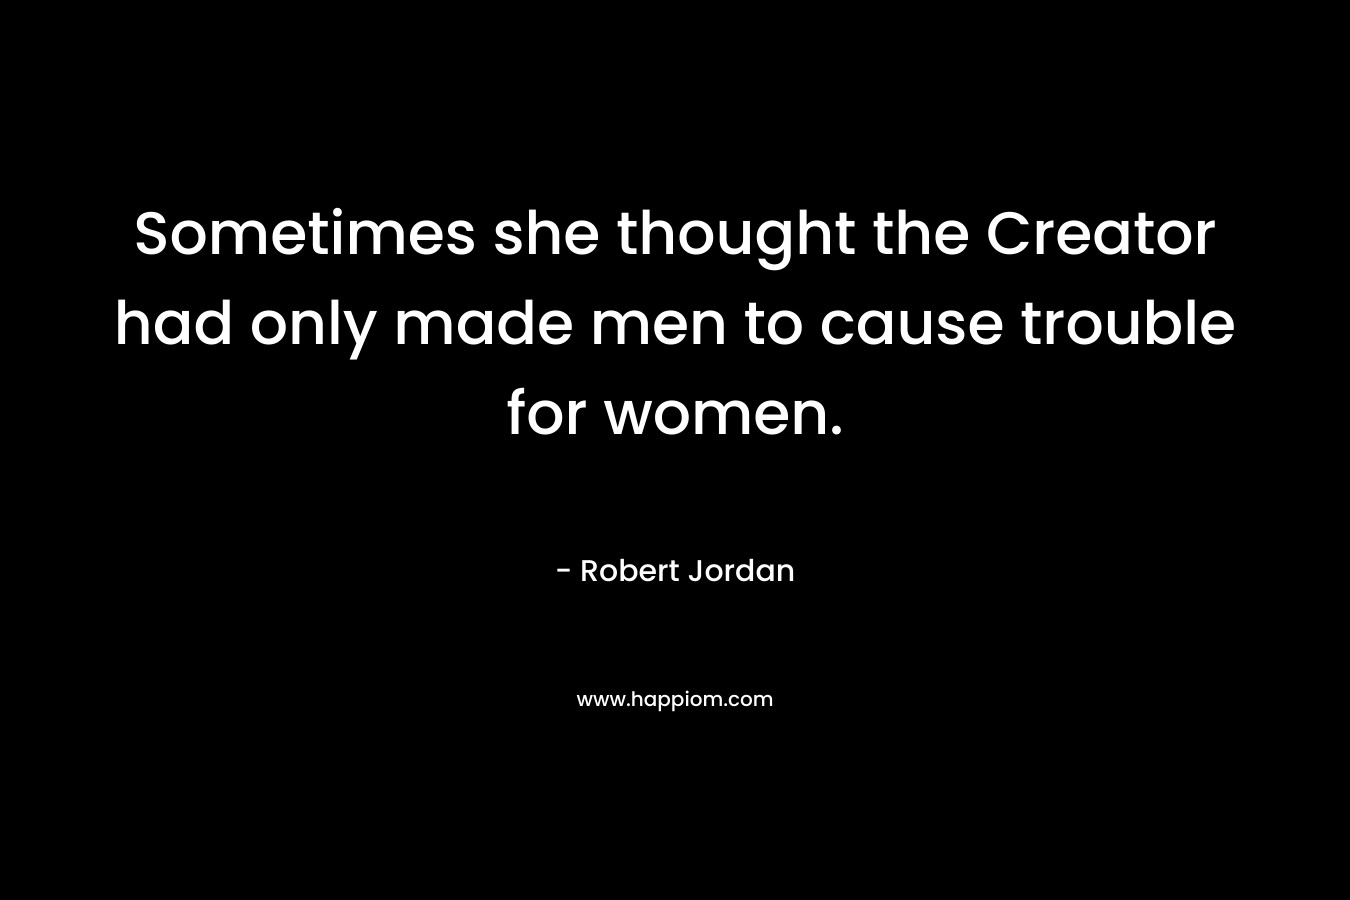 Sometimes she thought the Creator had only made men to cause trouble for women. – Robert Jordan